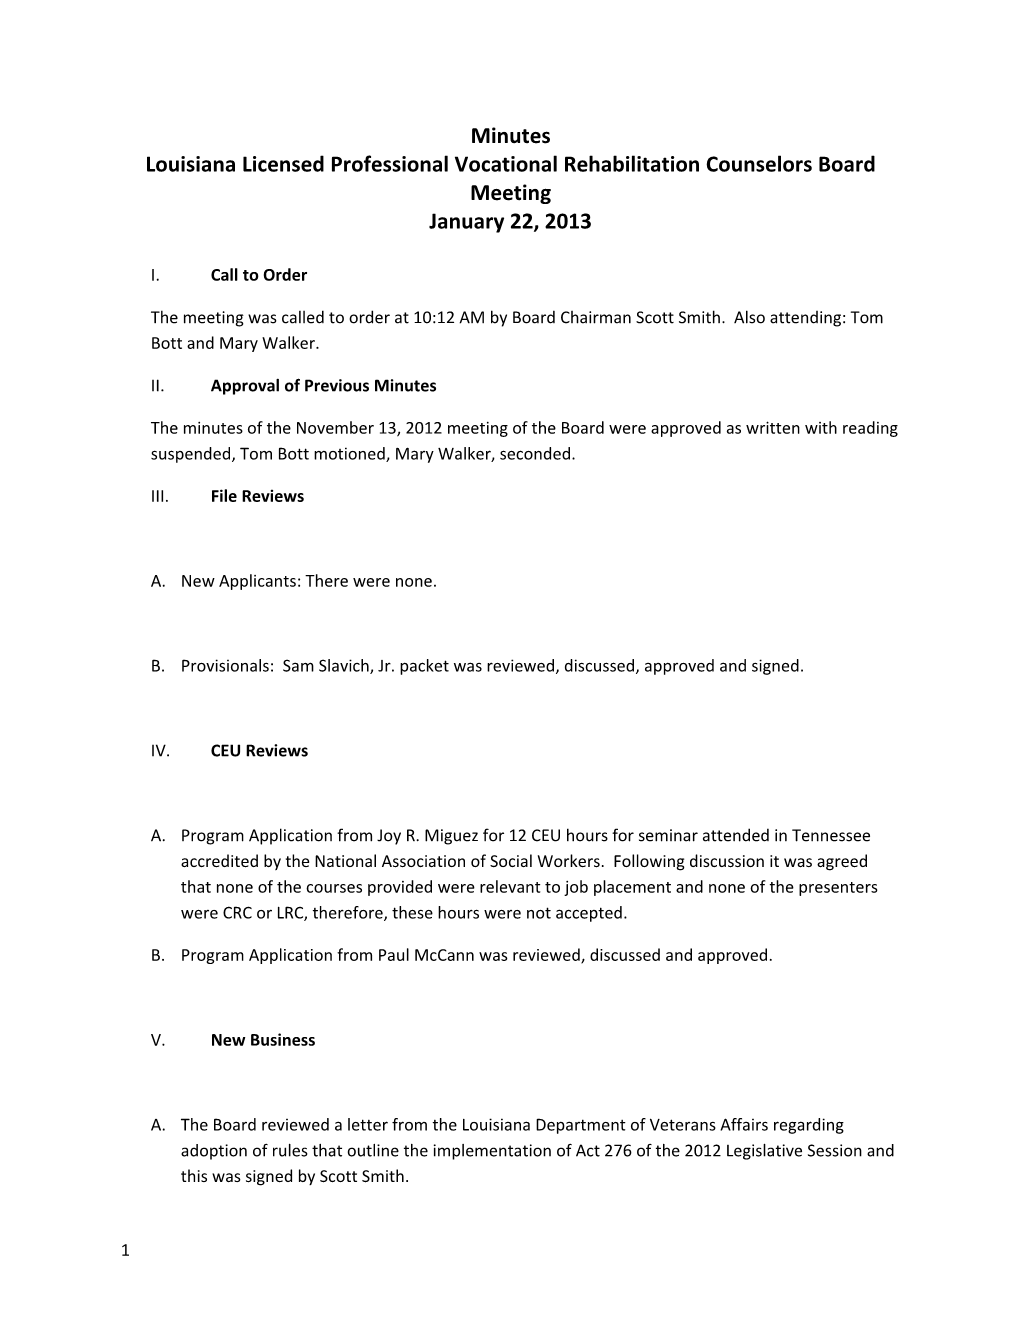 Louisiana Licensed Professional Vocational Rehabilitation Counselors Board Meeting s1